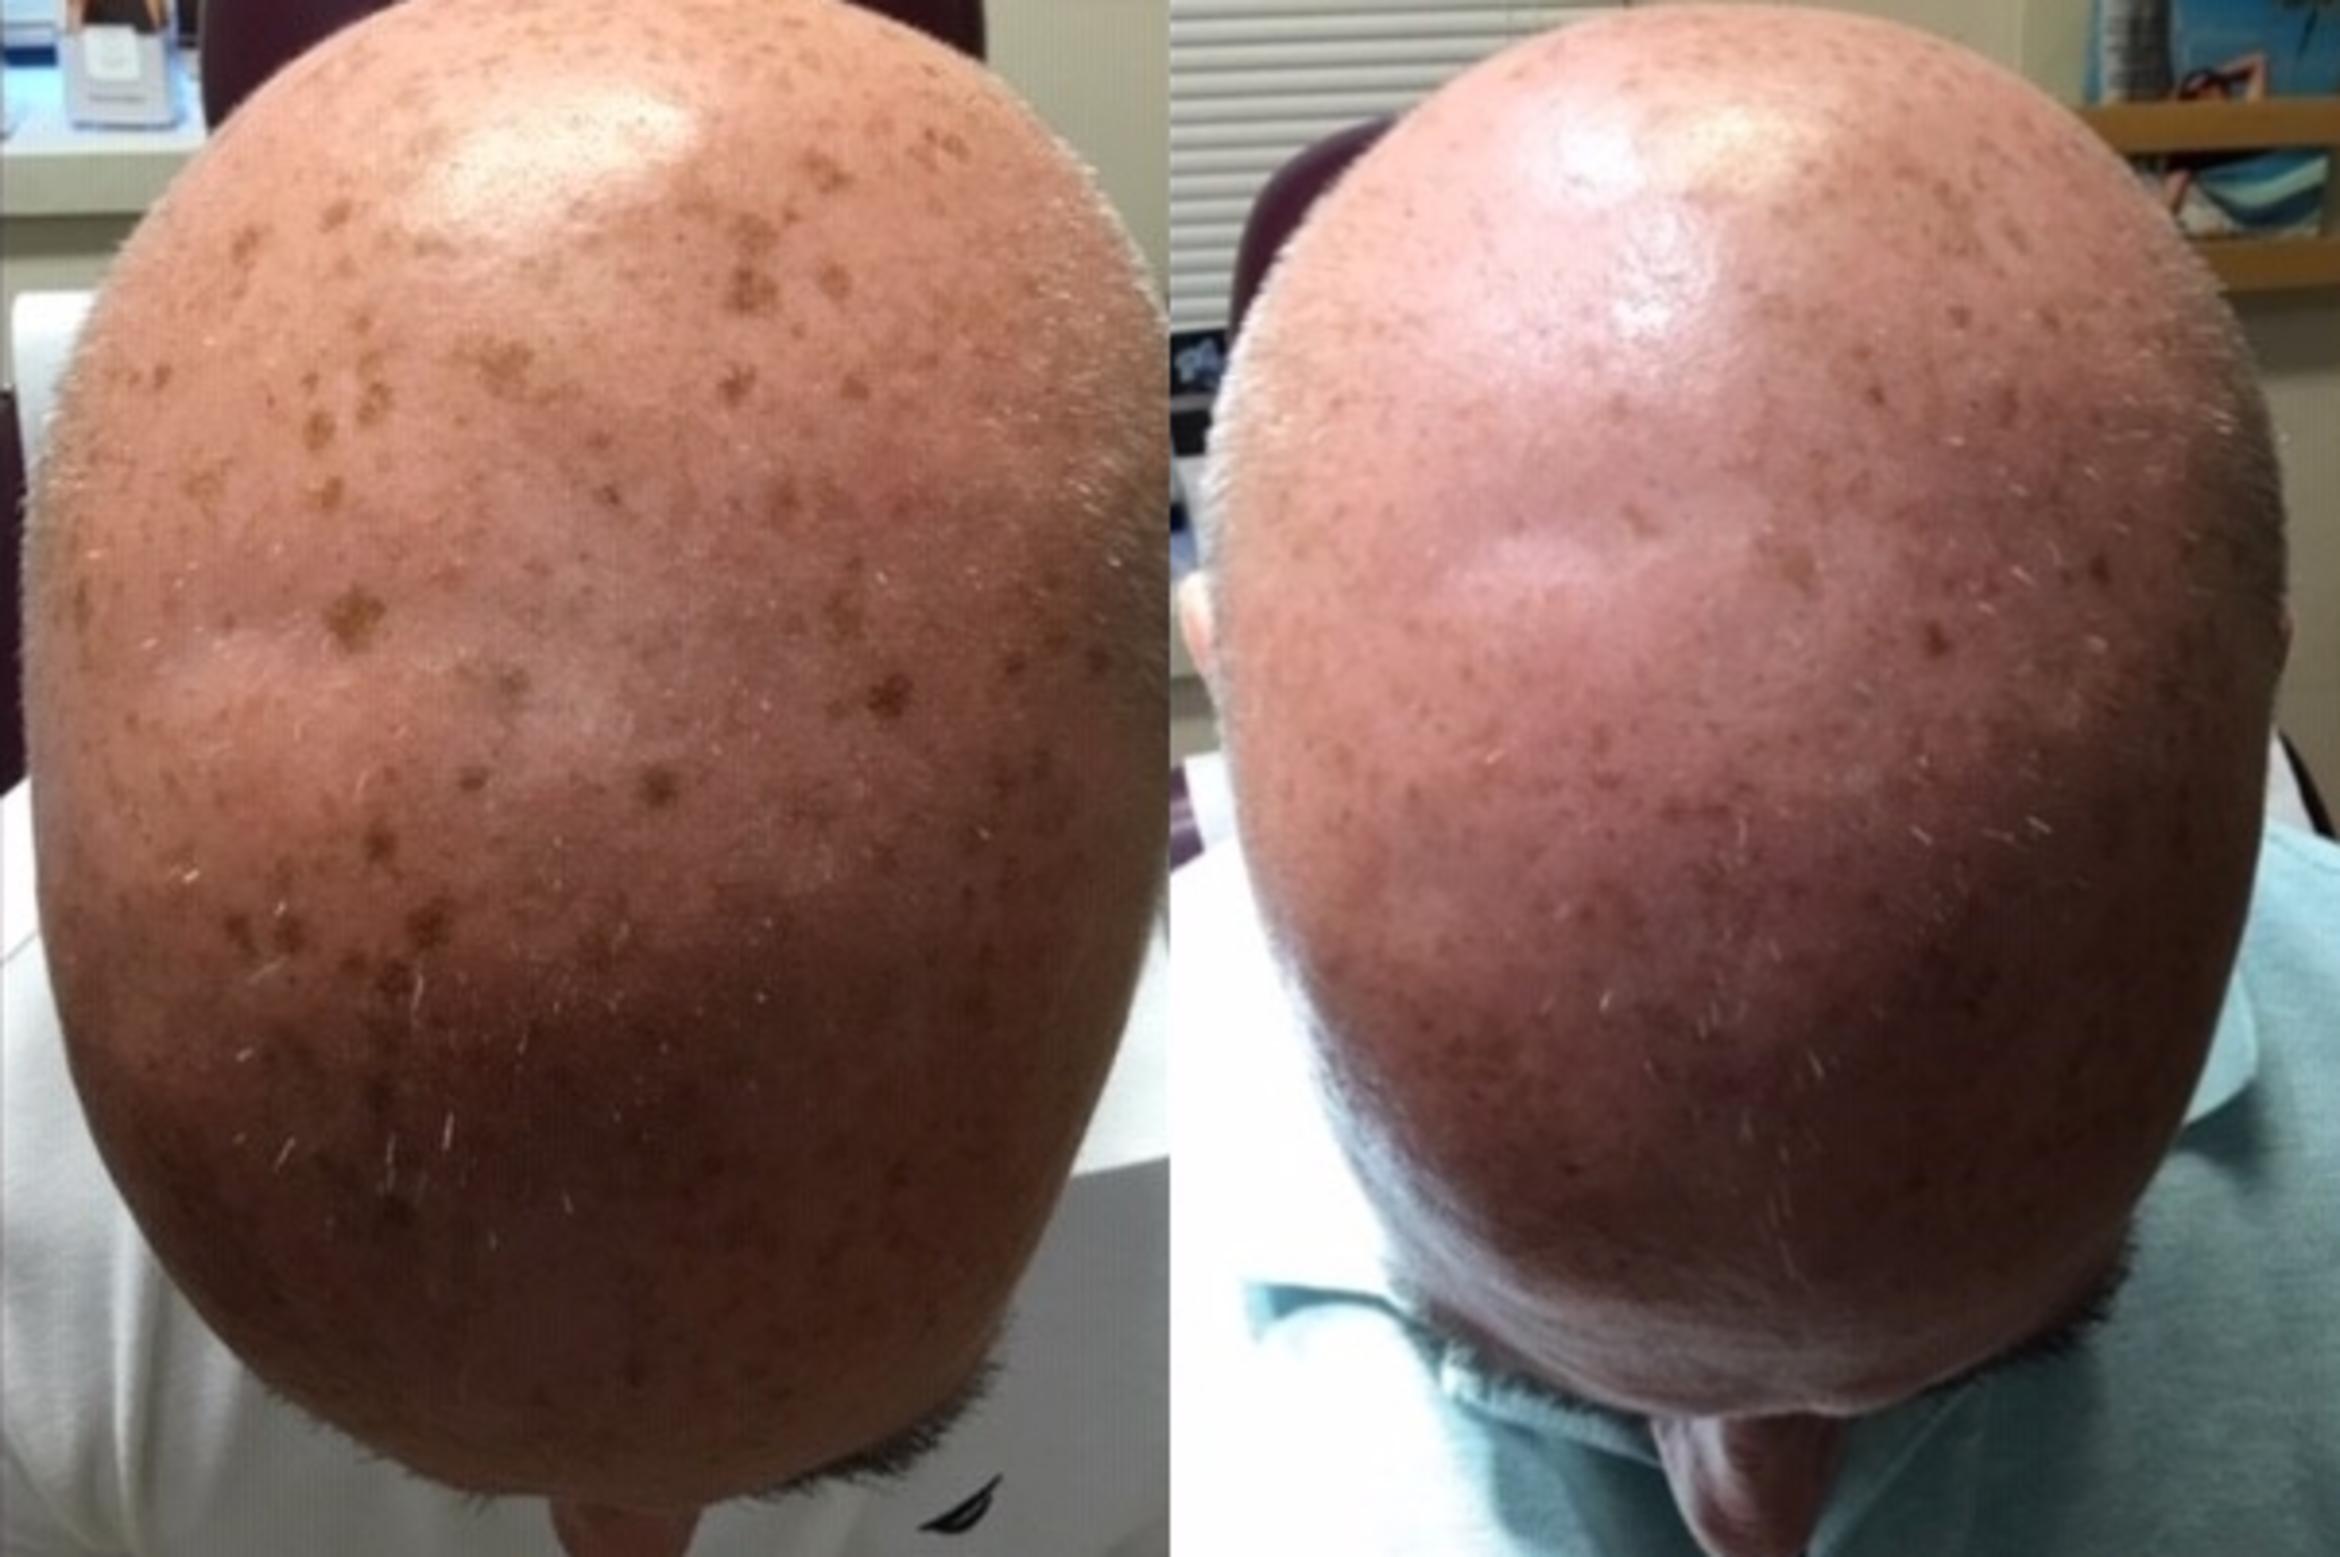 Laser Sunspot Removal Before & After Photo | New Jersey & Pennsylvania,  | The Derm Group